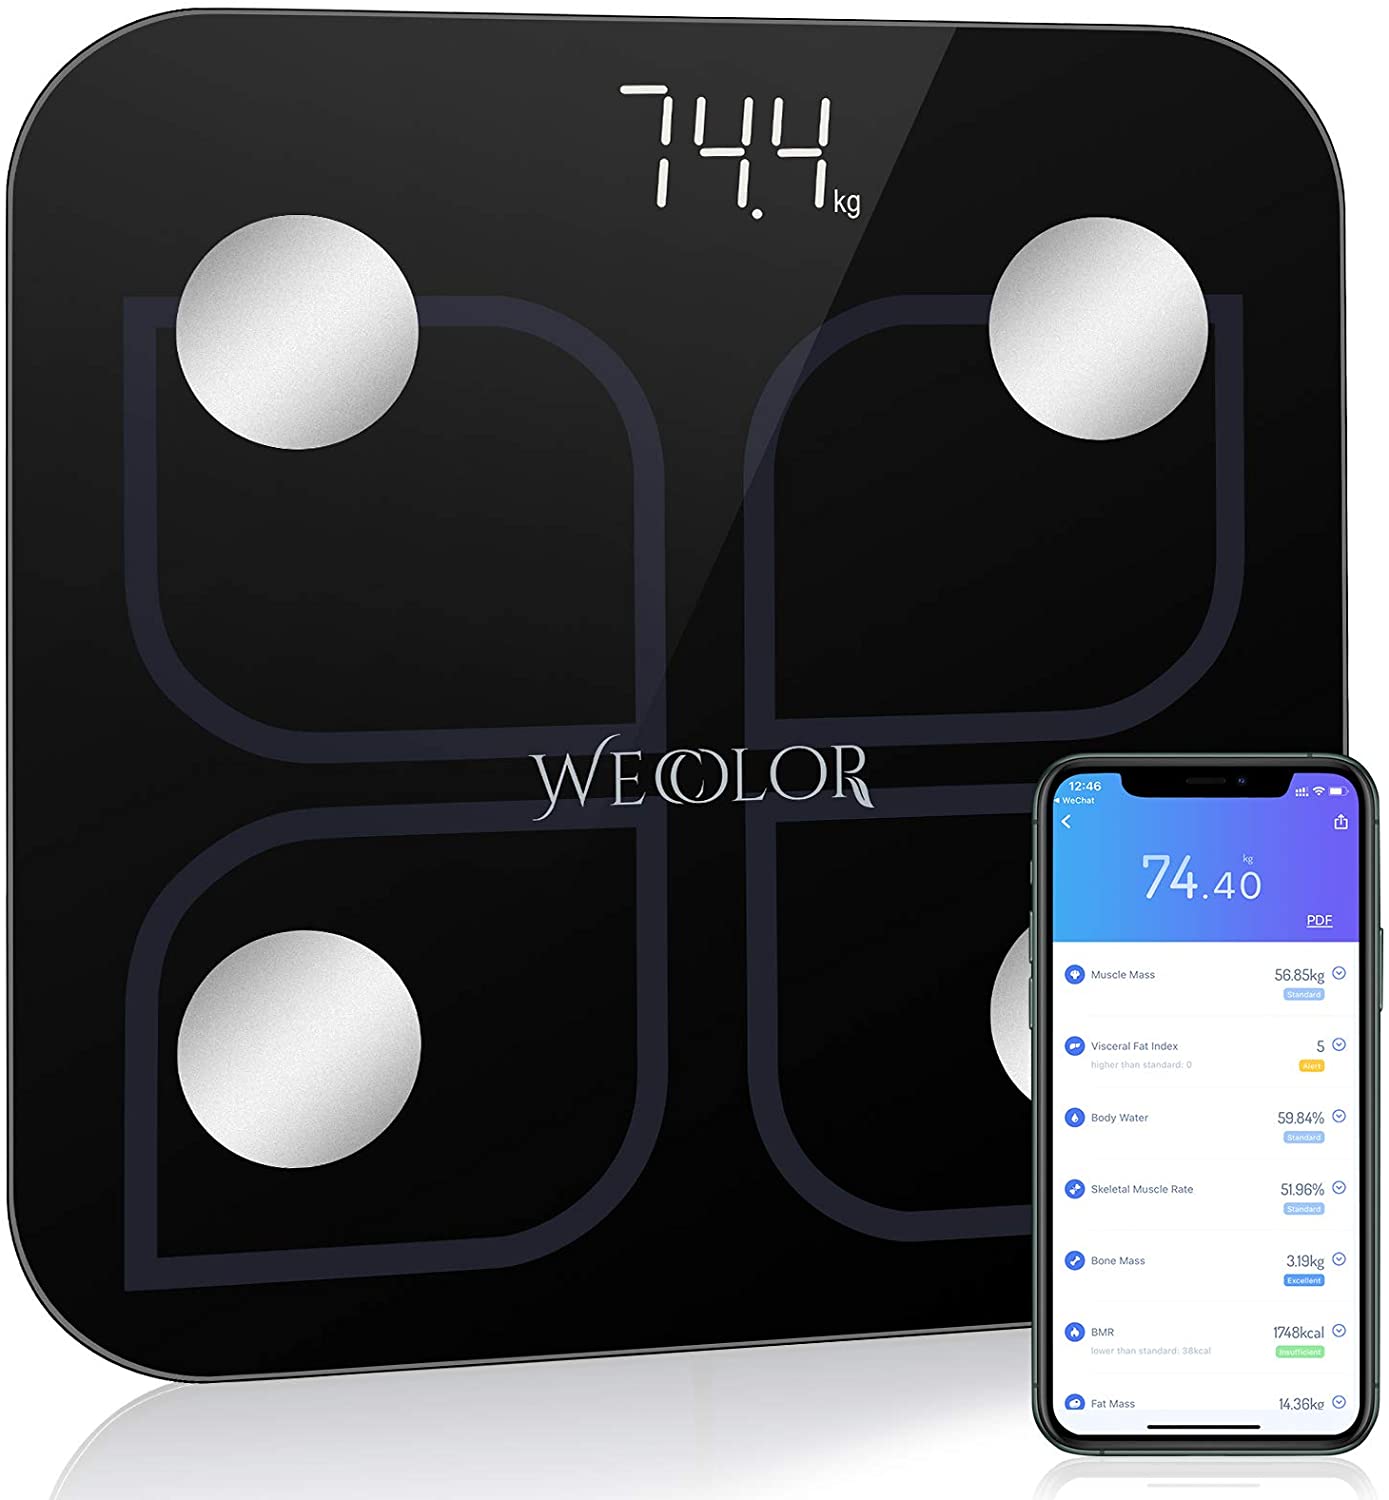 Wecolor Bluetooth Weighing Scale (up to 400LBs) $15 + free s/h at Amazon